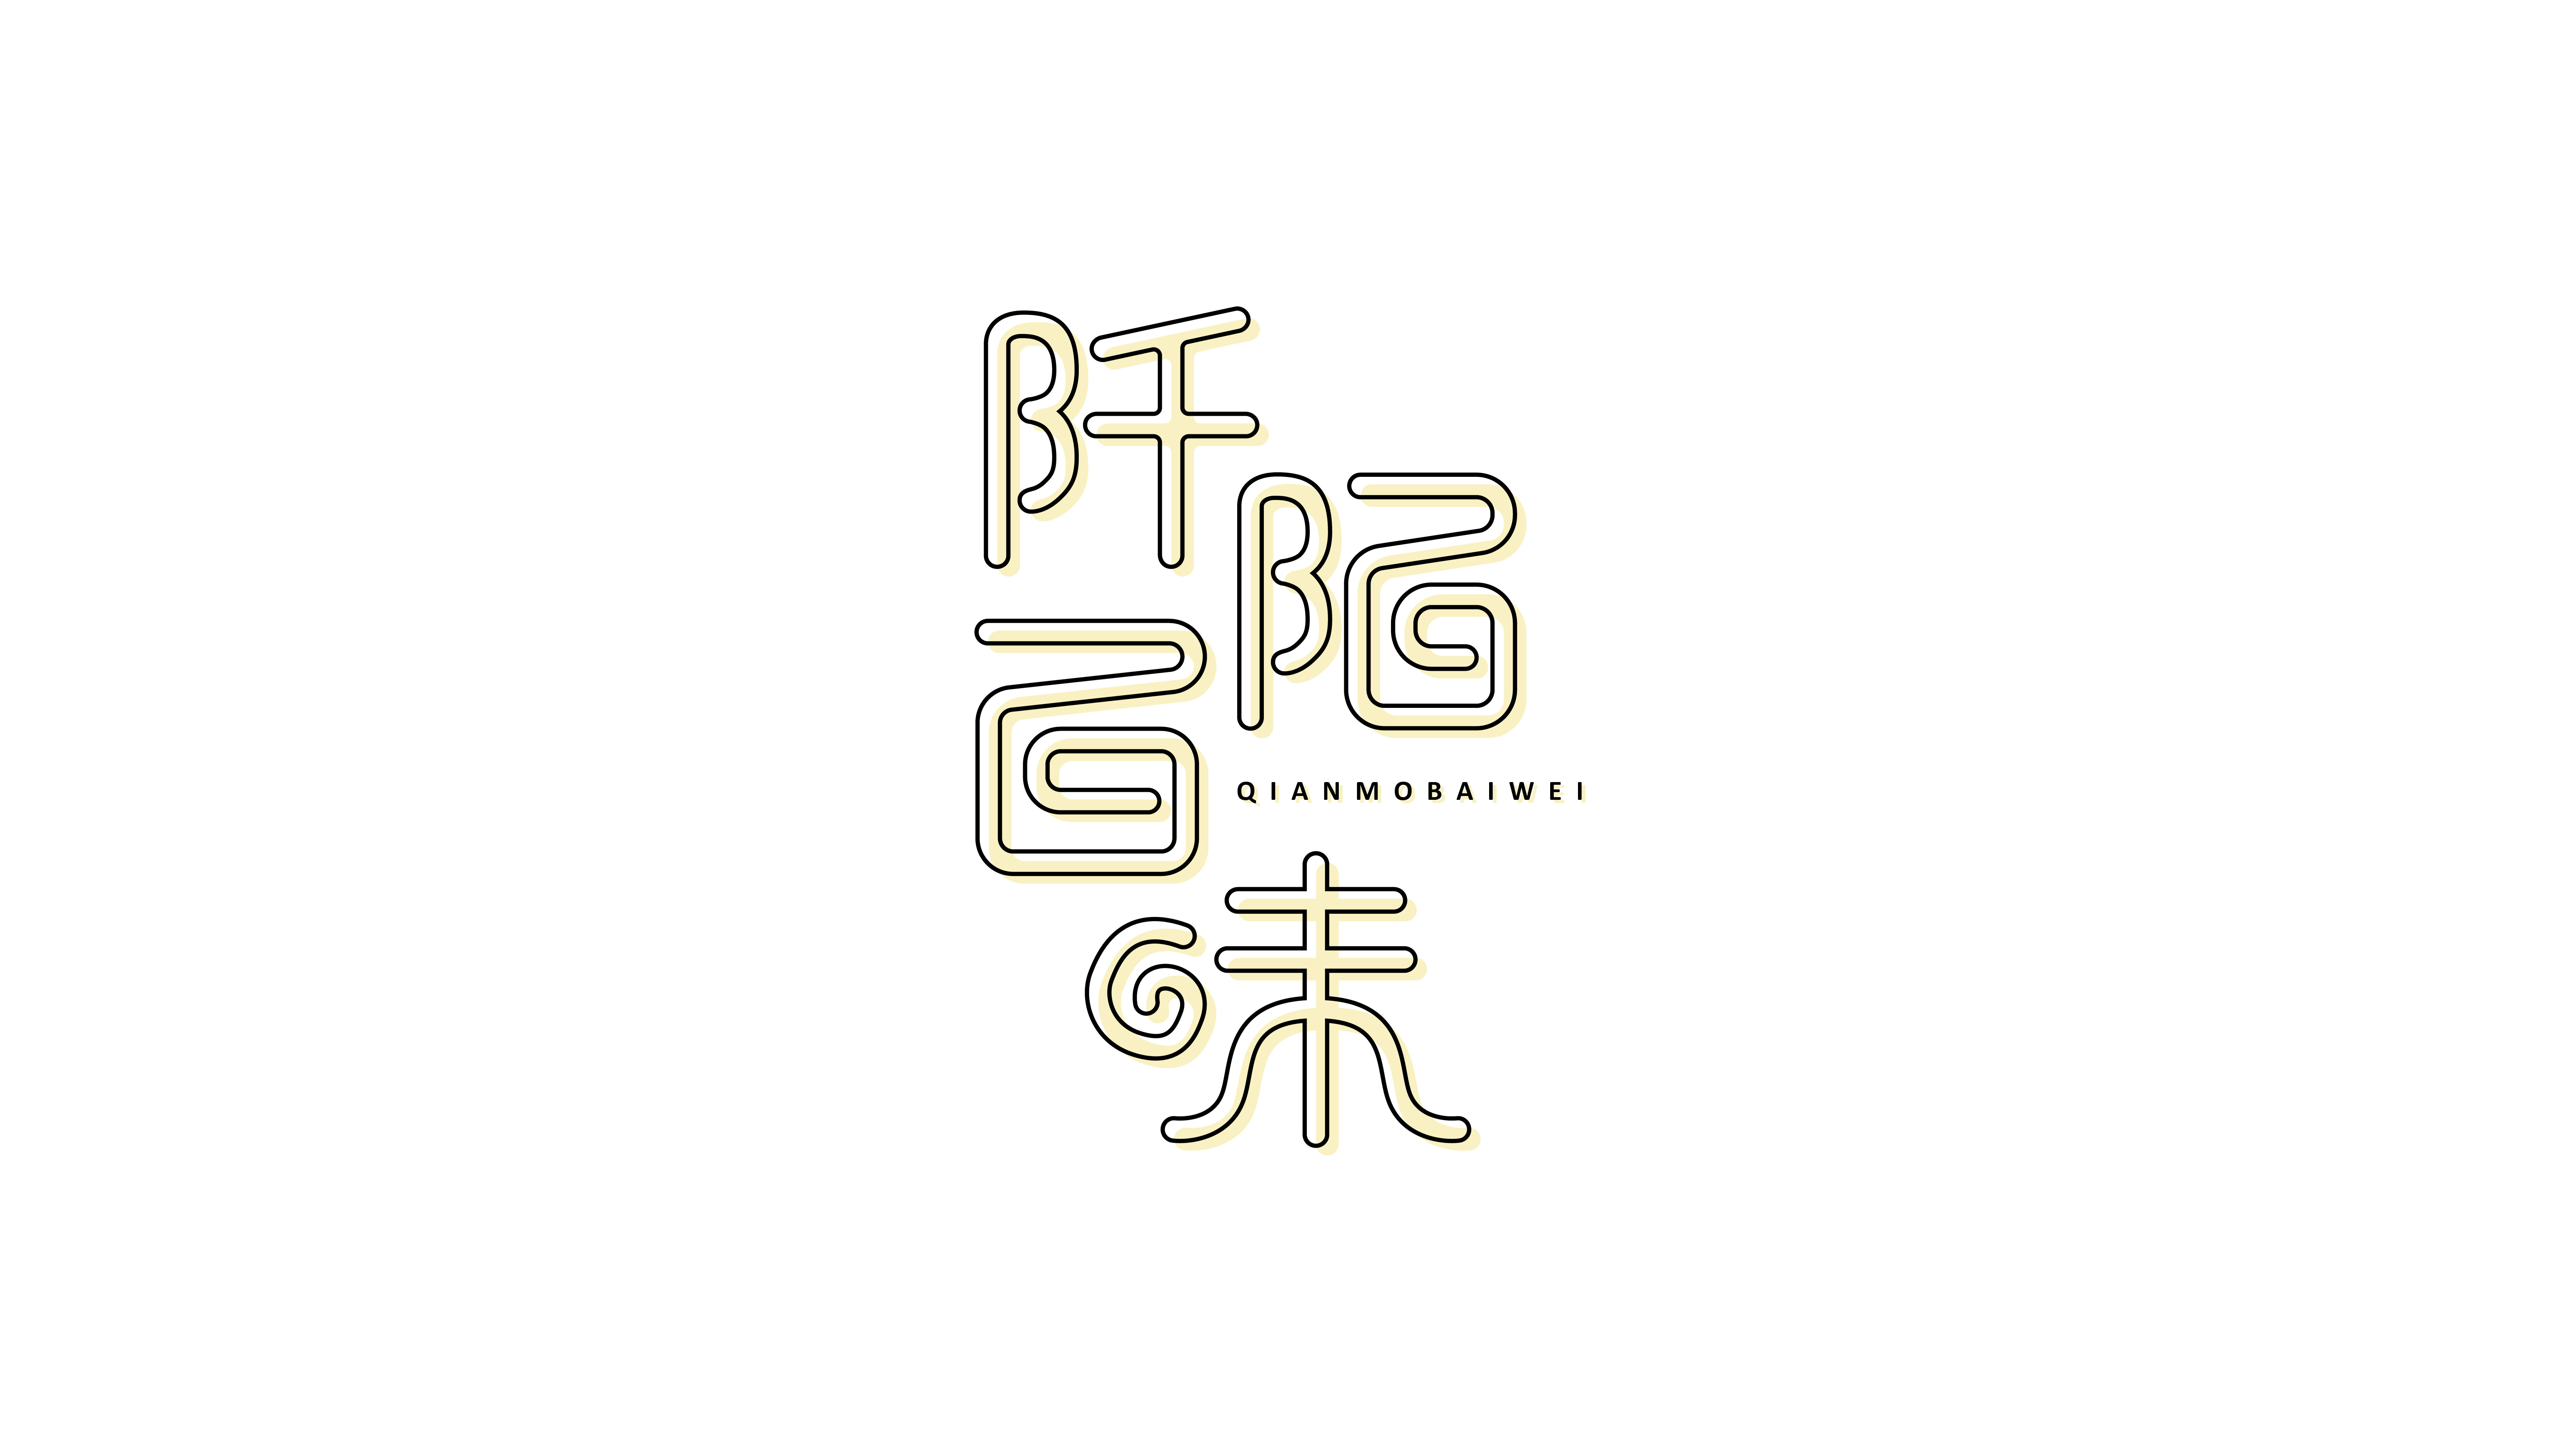 15p The latest collection of Chinese fonts #31